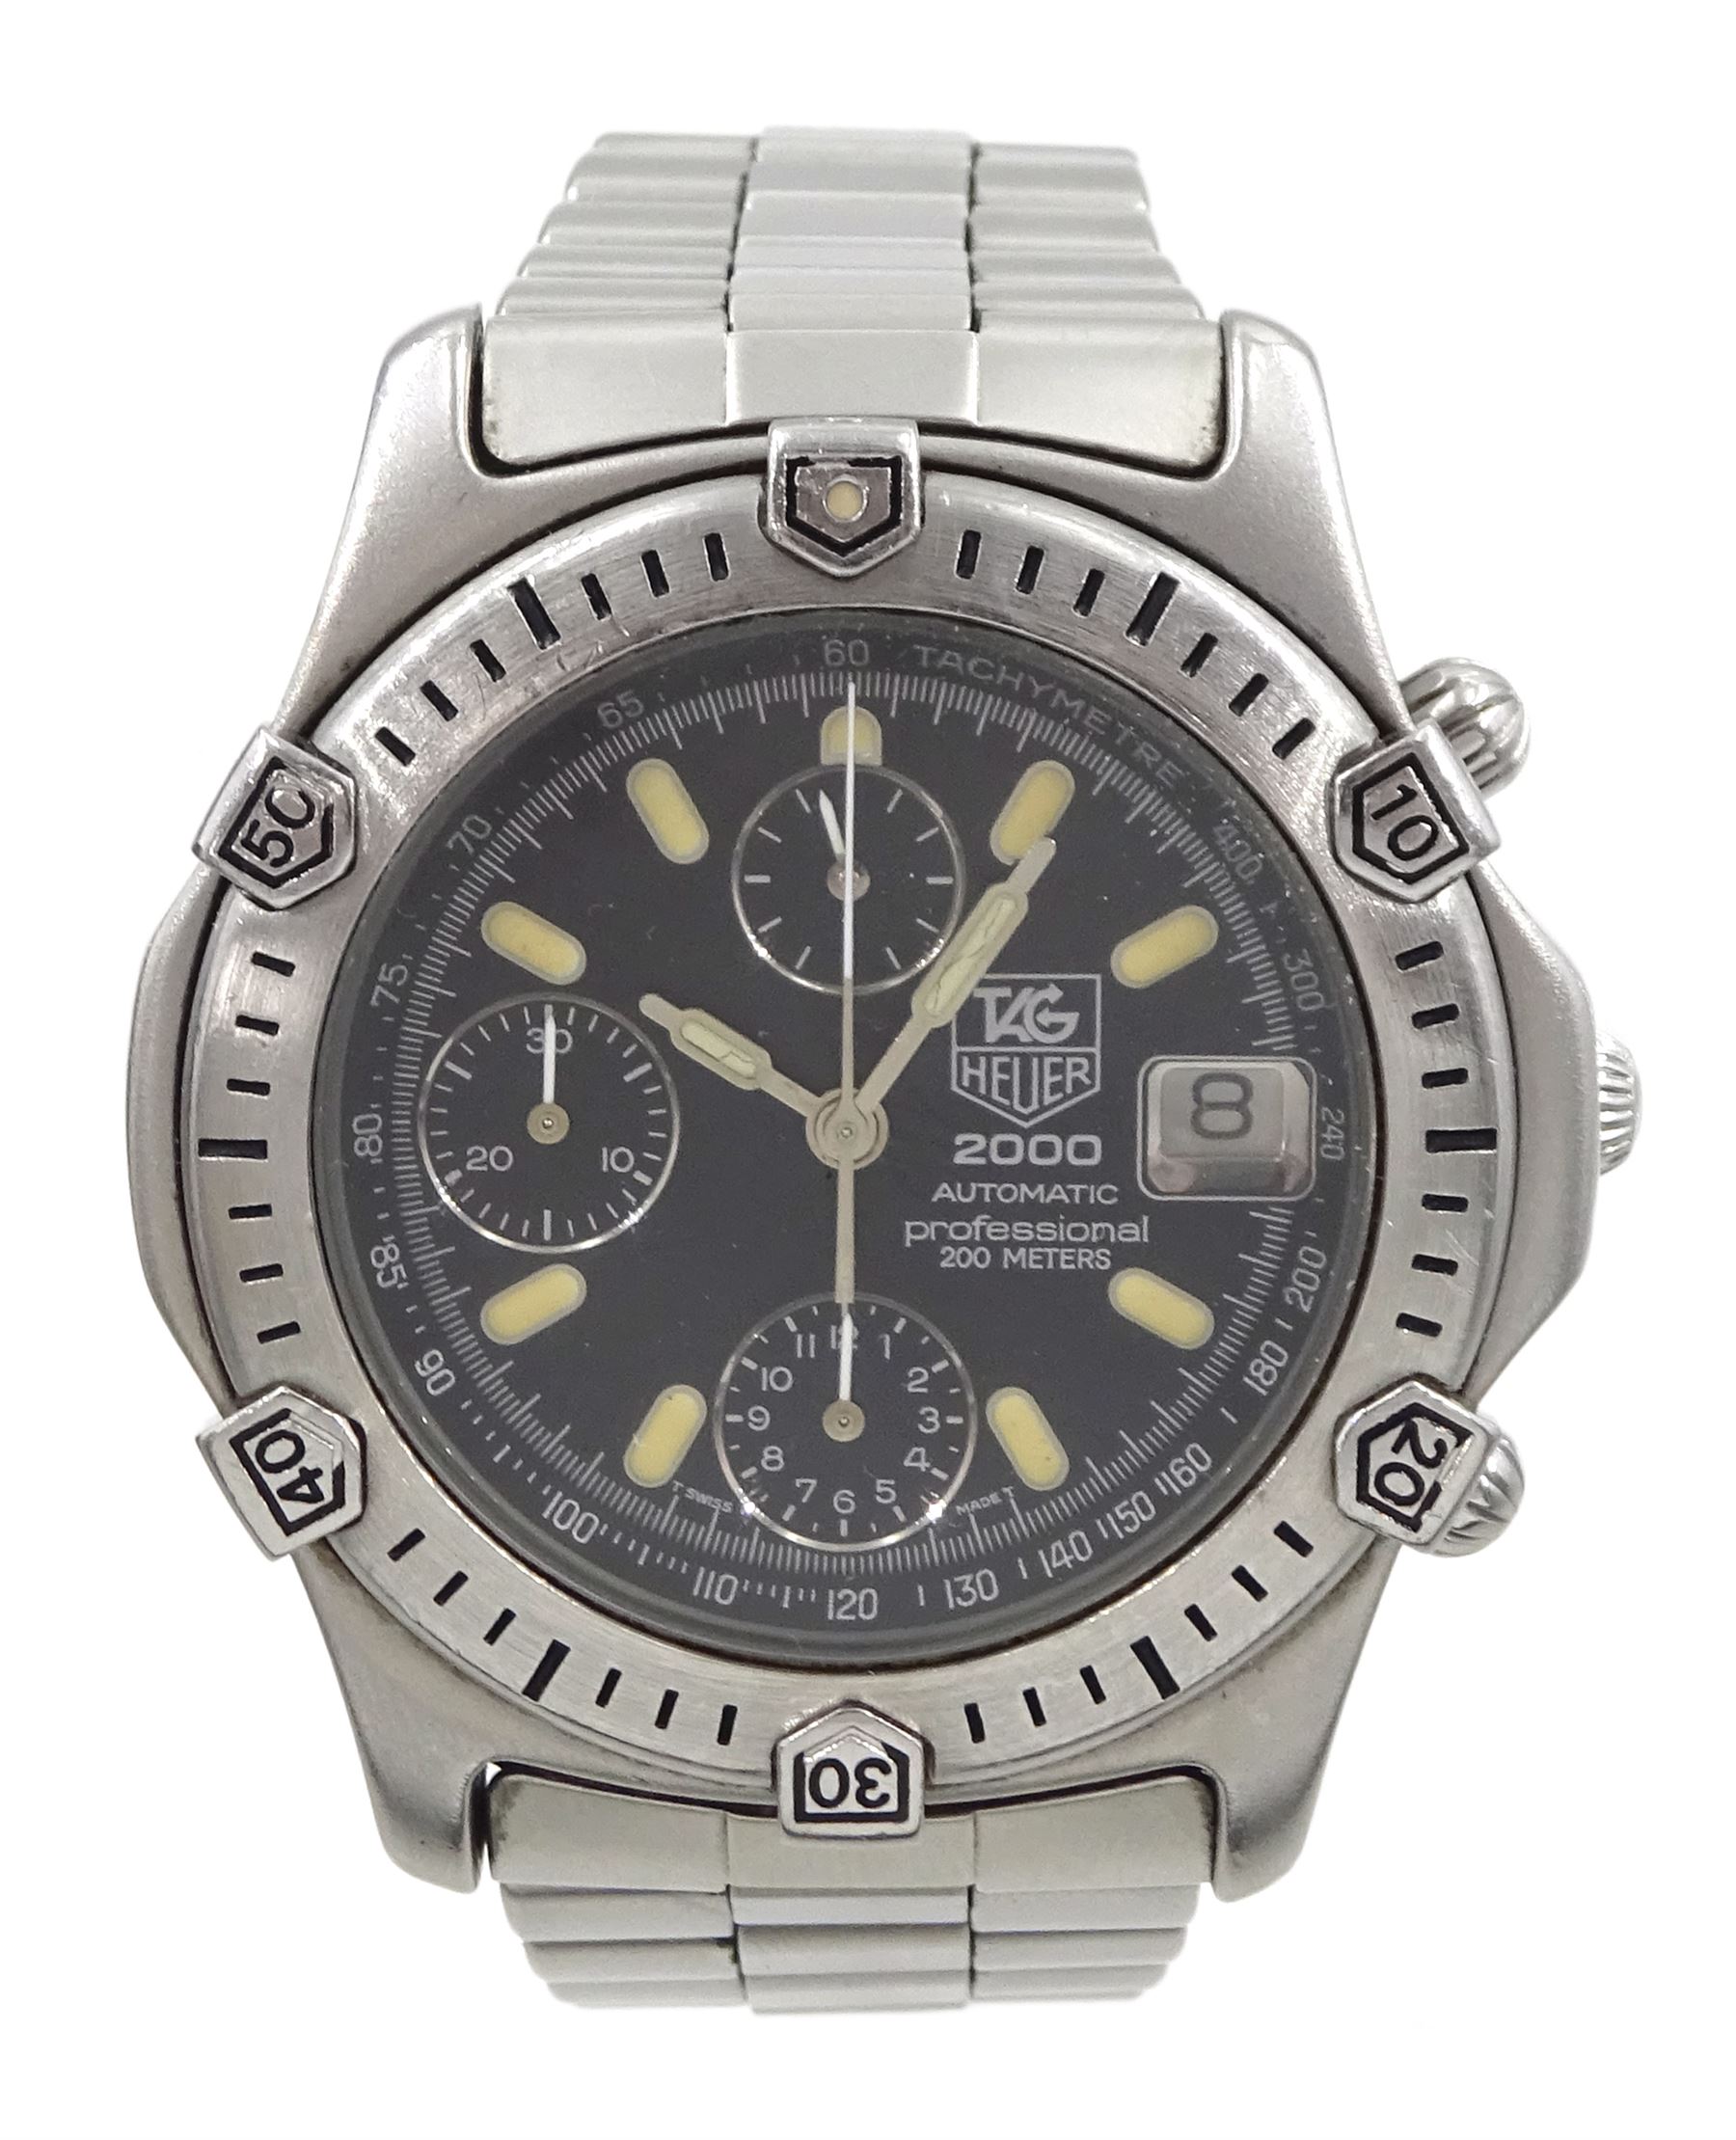 Tag Heuer 2000 gentleman's stainless steel automatic chronograph wristwatch